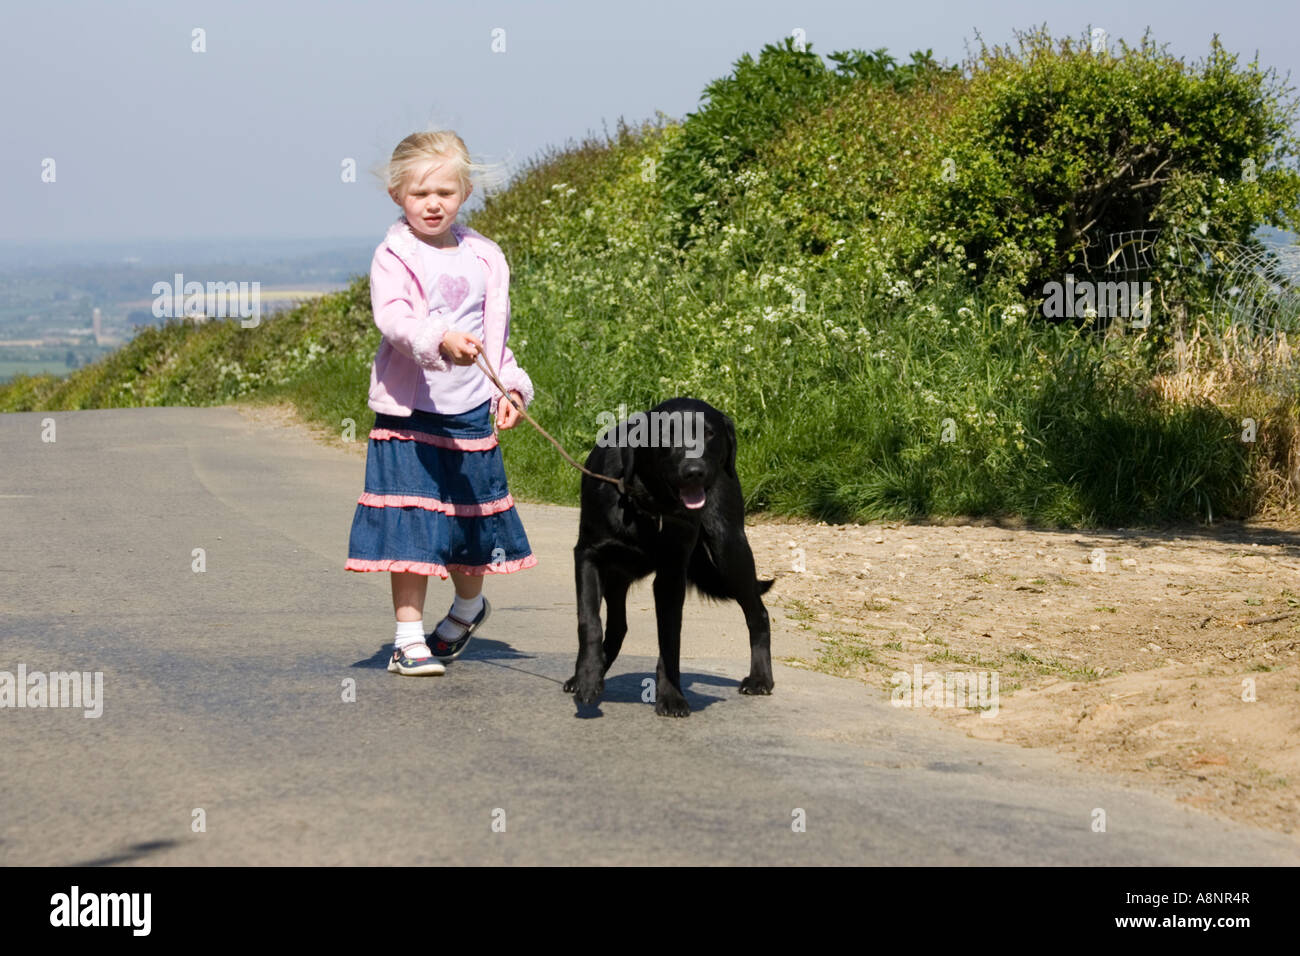 four-year-old-blonde-girl-taking-black-labrador-for-a-walk-on-country-A8NR4R.jpg